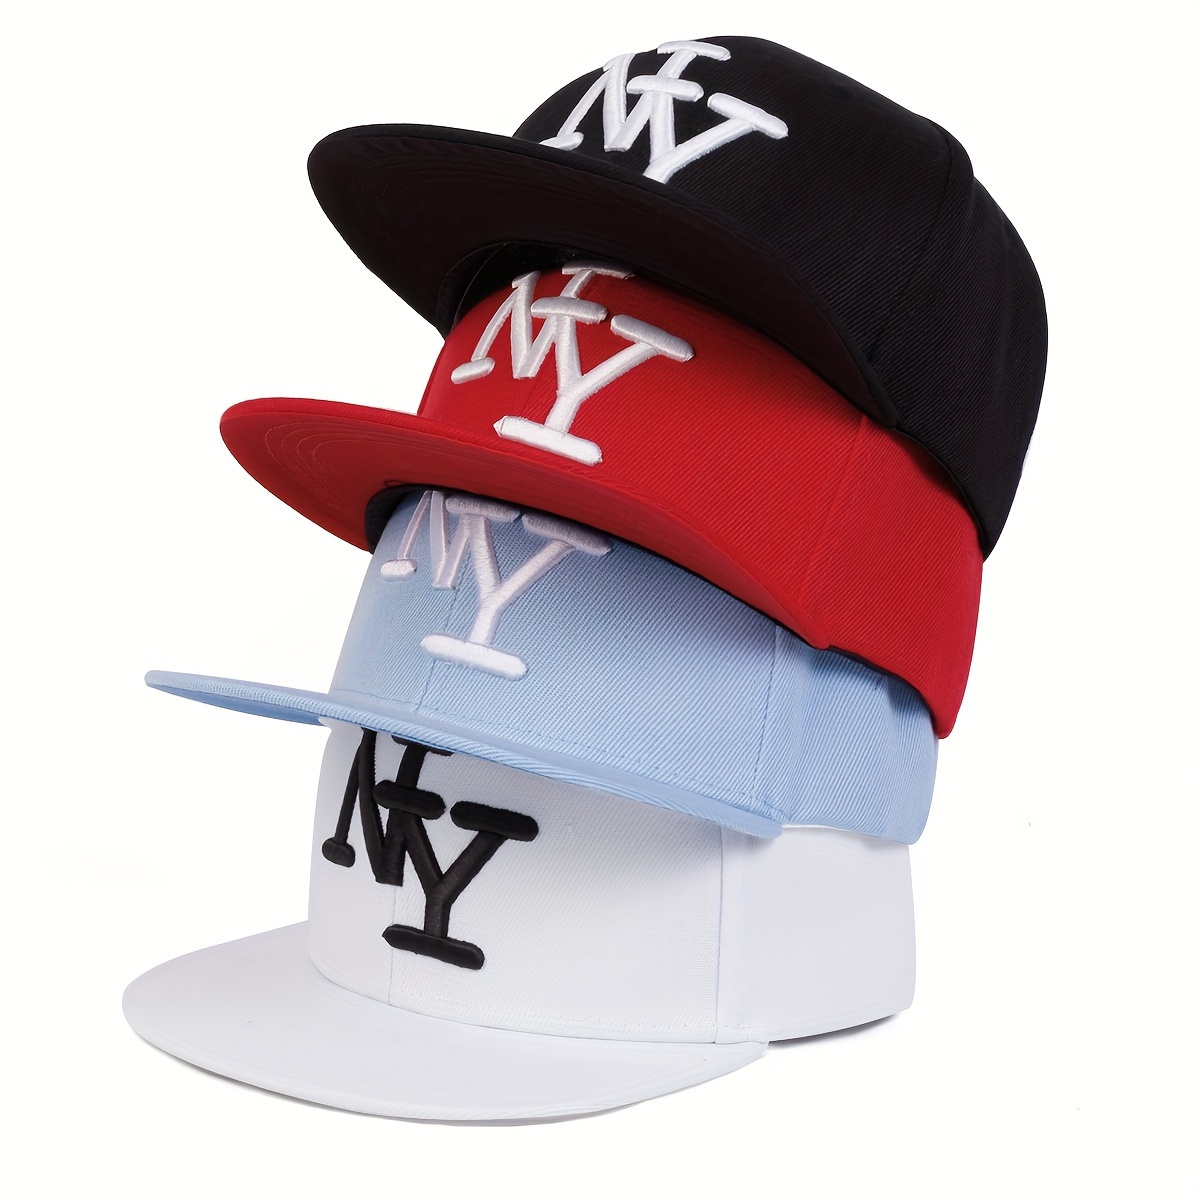 

Stylish And Adjustable Ny Letter Embroidery Sun Protection Baseball Cap For Men, Perfect For Spring And Autumn Travel, Beach Parties, And Outdoor Leisure Activities.